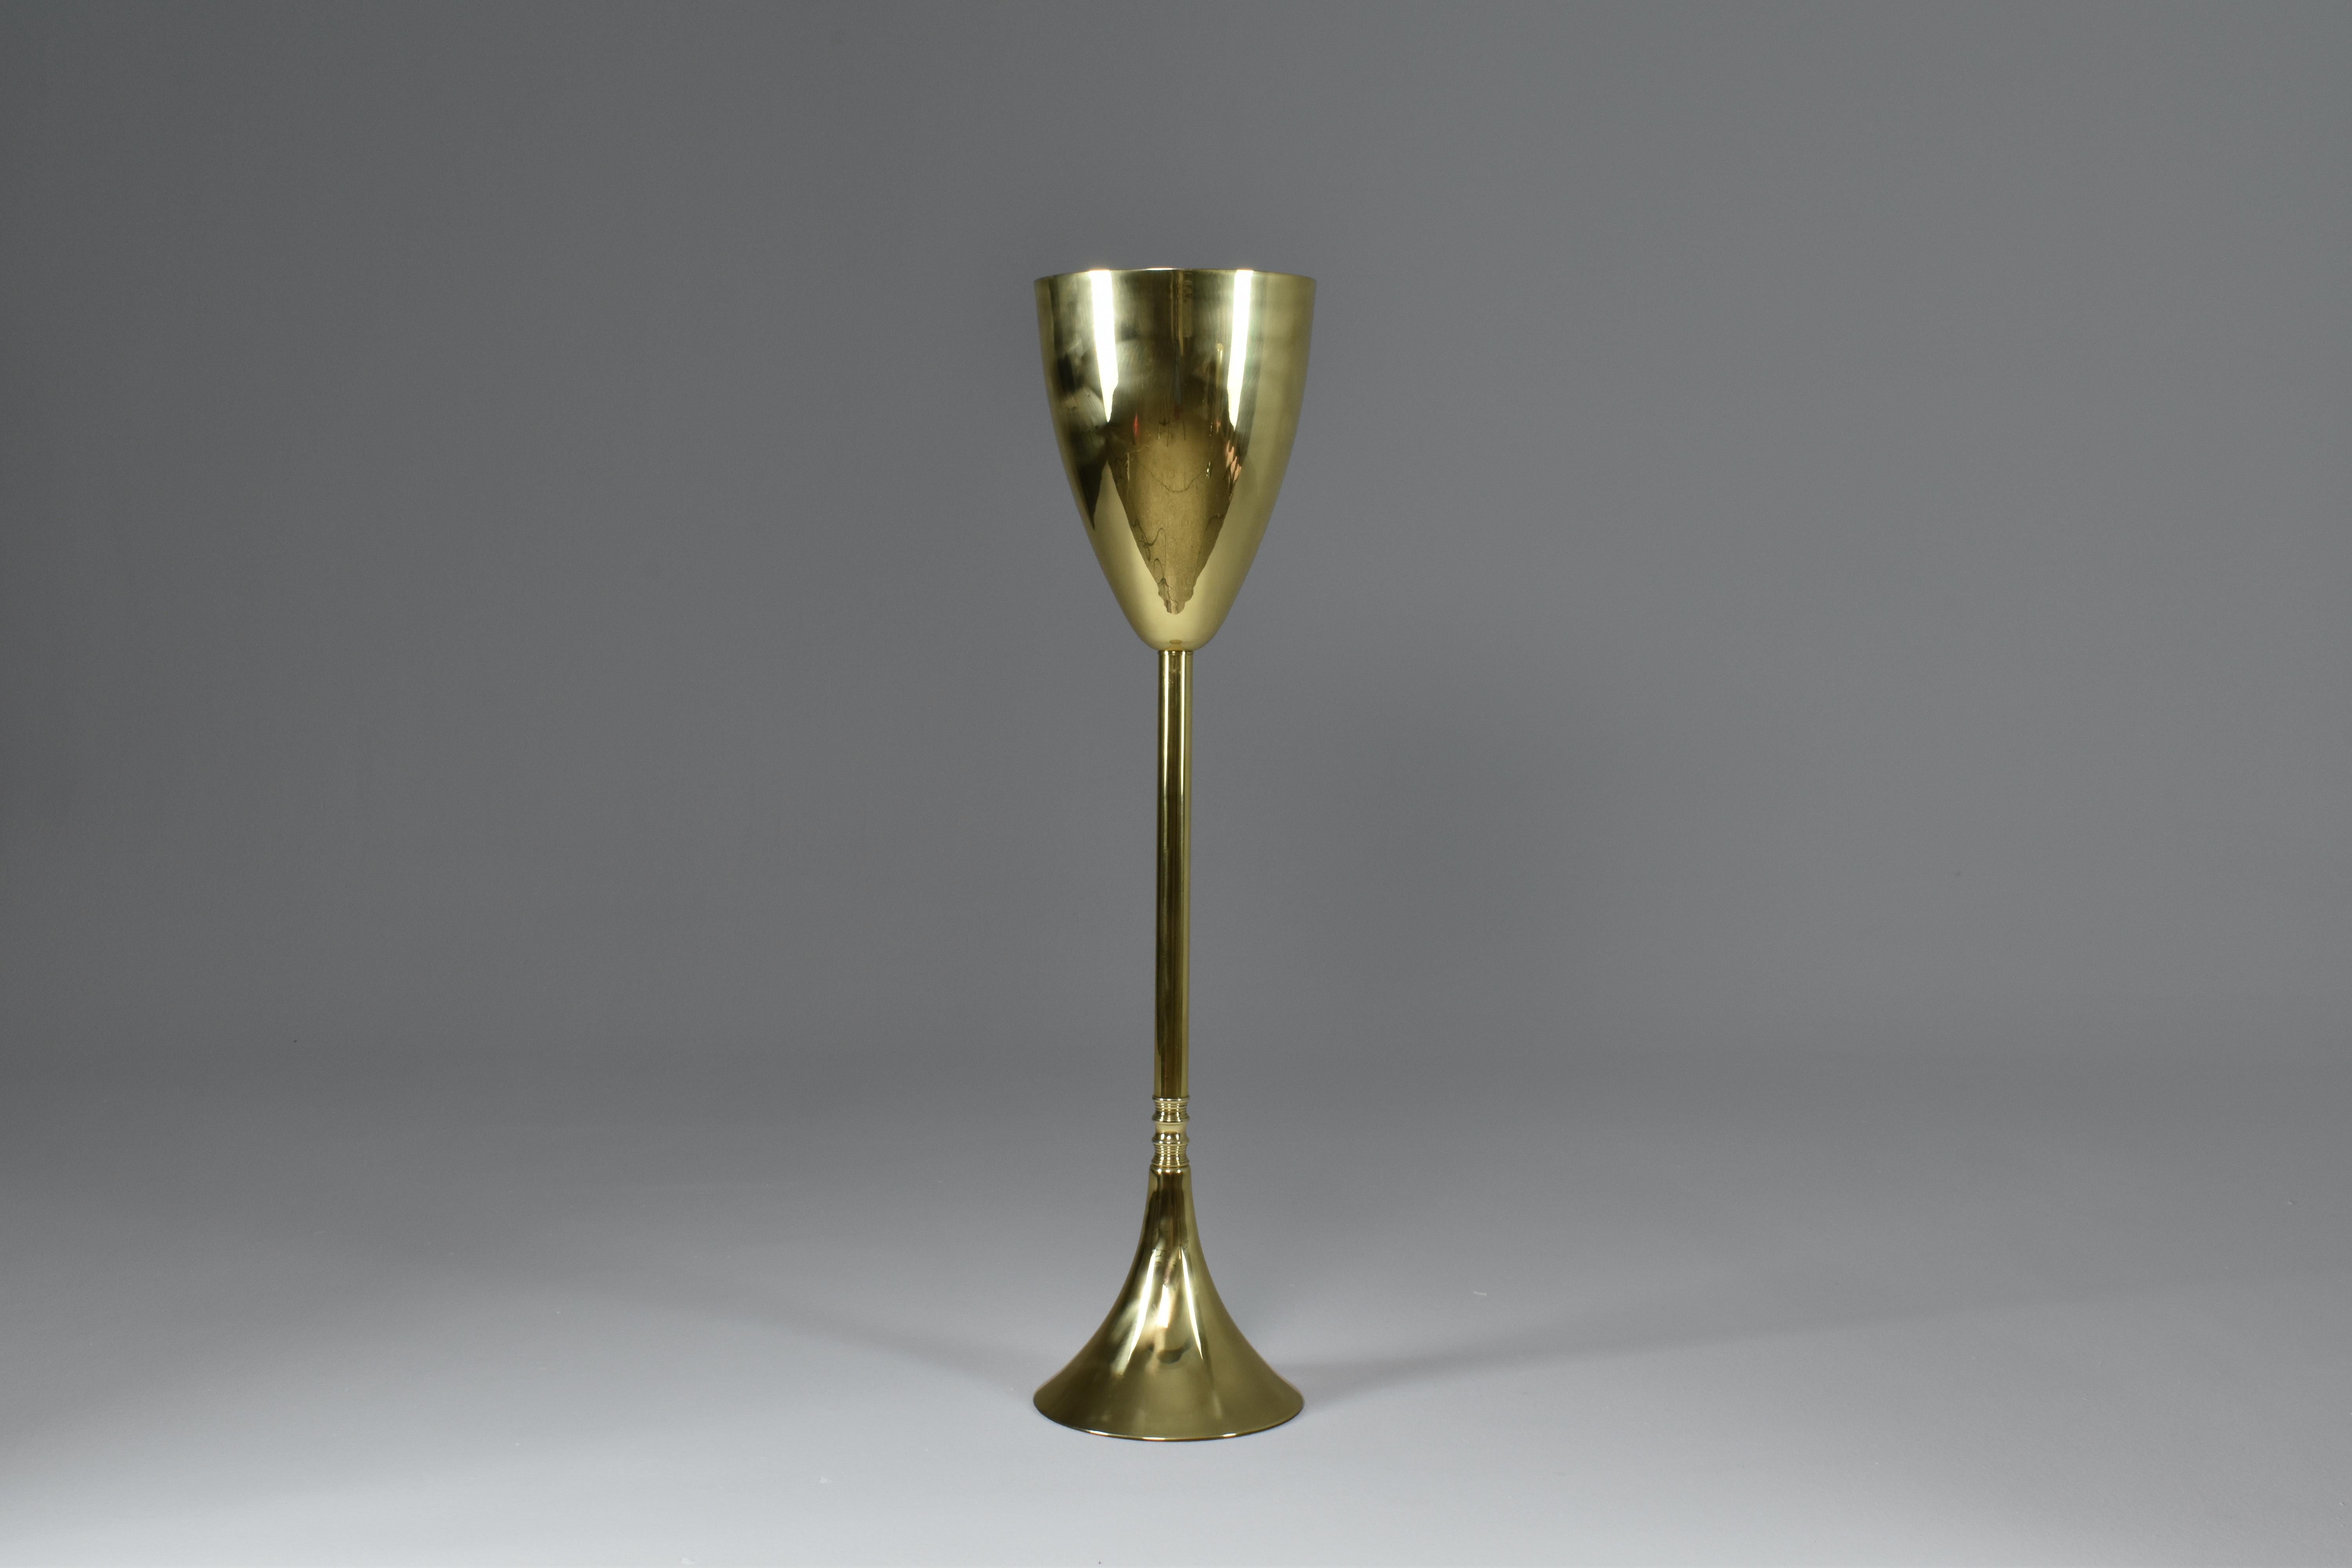 Contemporary made-to-measure handcrafted polished brass champagne or wine bucket stand with skillfully sculpted and handmade hammered details.
Designed by Jonathan Amar, handcrafted at his atelier in Rabat. 

A standout accessory for high-end